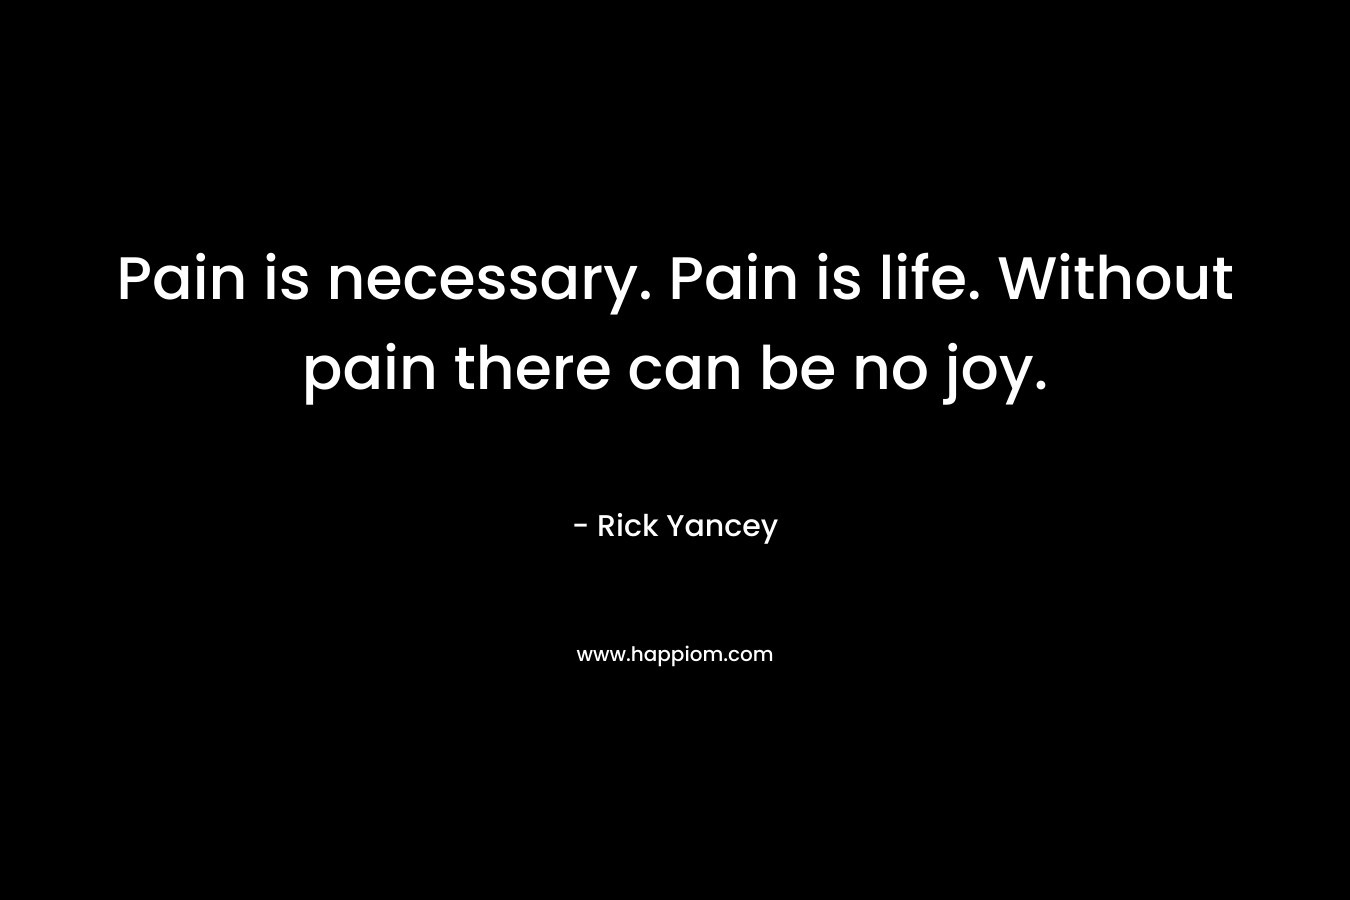 Pain is necessary. Pain is life. Without pain there can be no joy.